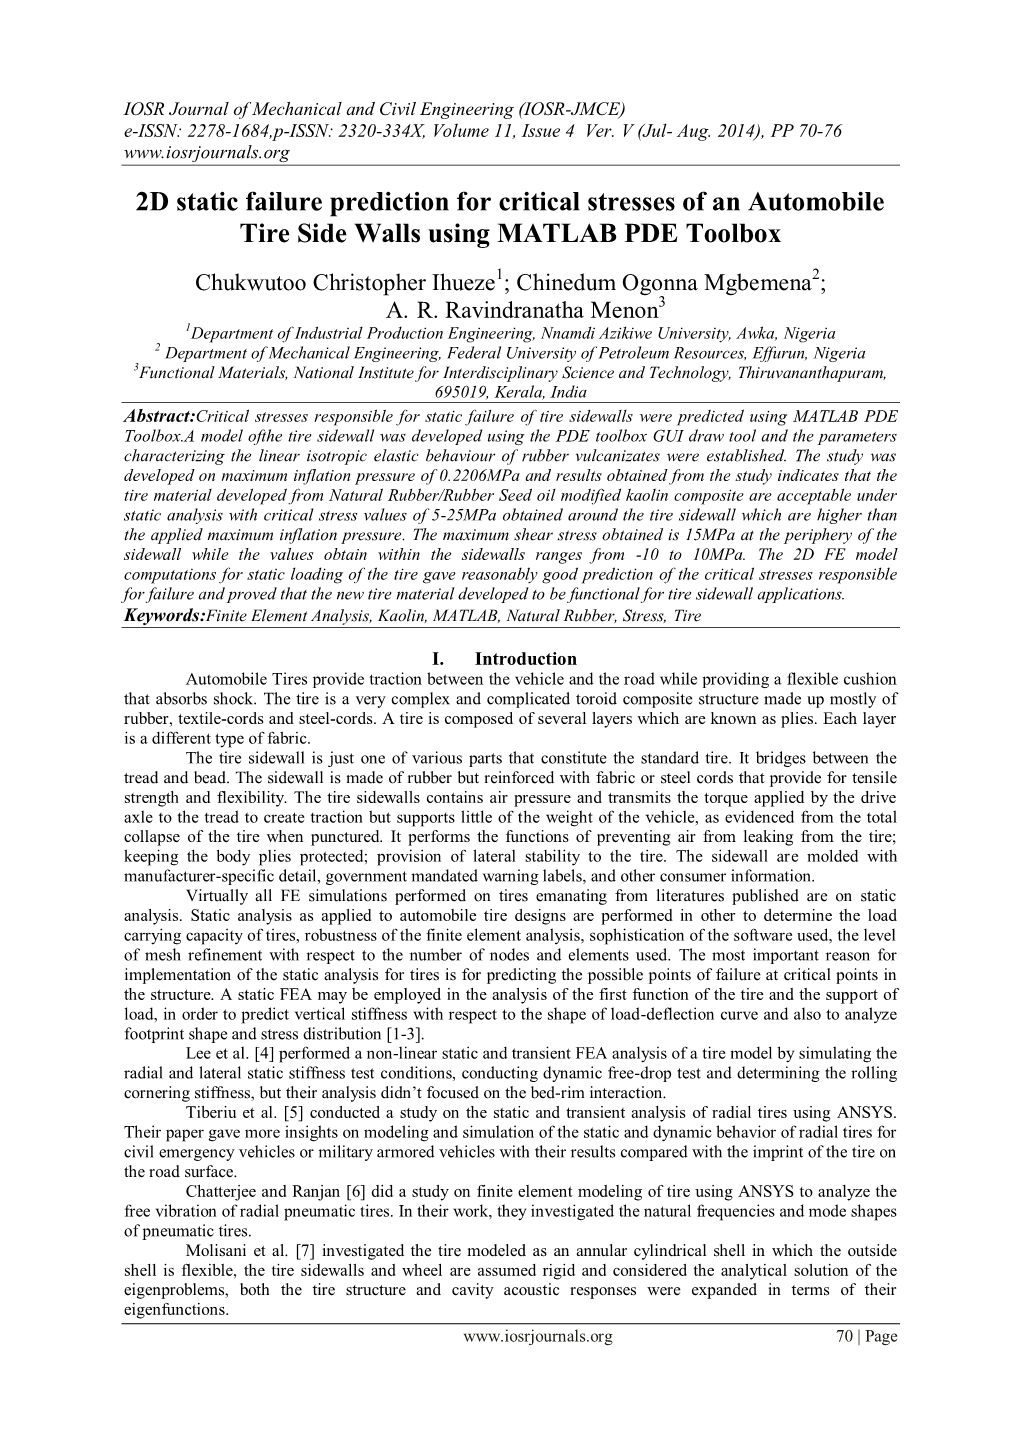 2D Static Failure Prediction for Critical Stresses of an Automobile Tire Side Walls Using MATLAB PDE Toolbox